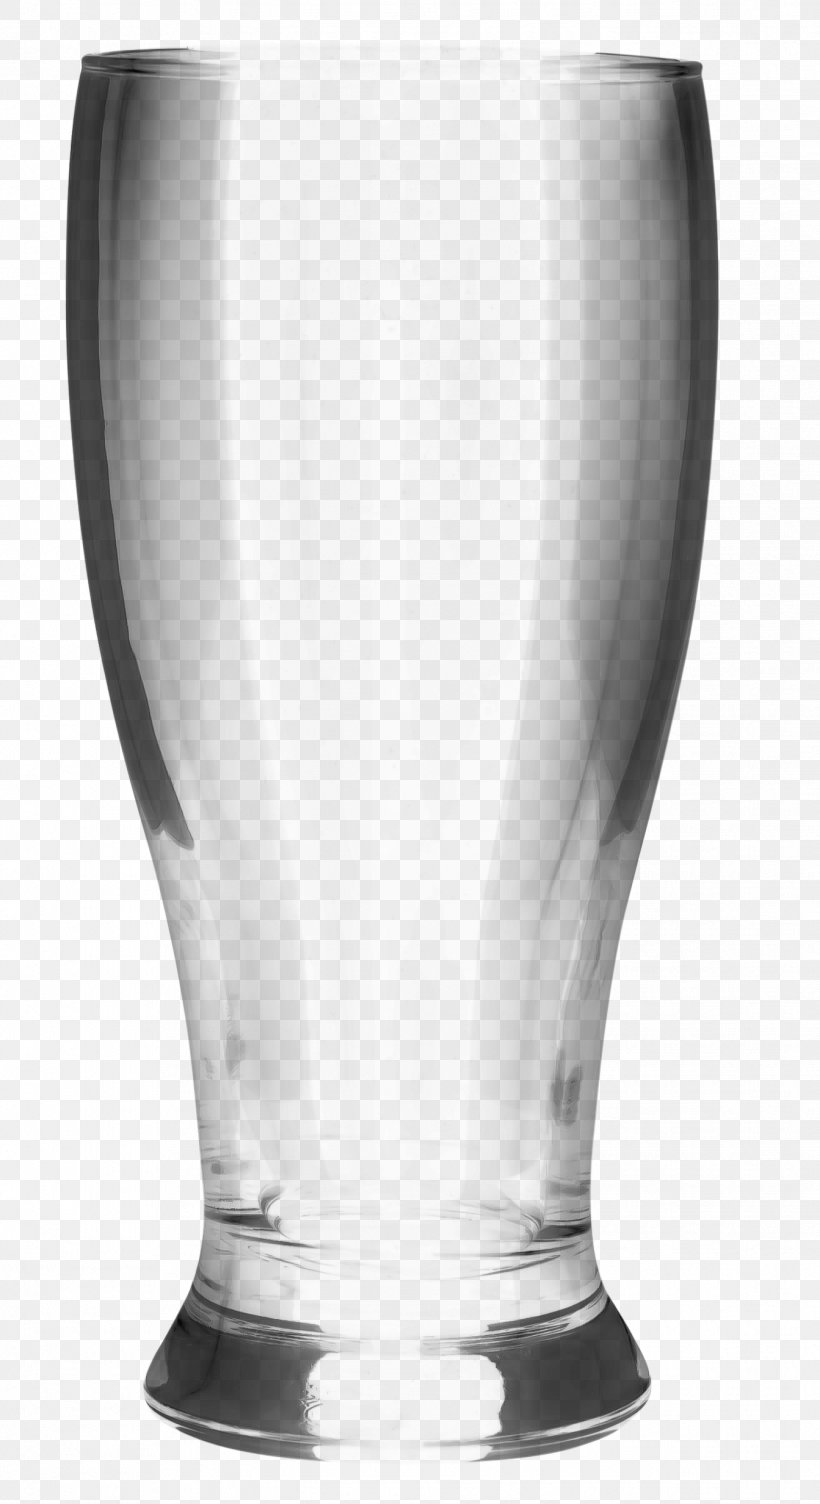 Highball Glass Pint Glass Beer Glasses, PNG, 1343x2464px, Highball Glass, Beer Glass, Beer Glasses, Drinkware, Glass Download Free